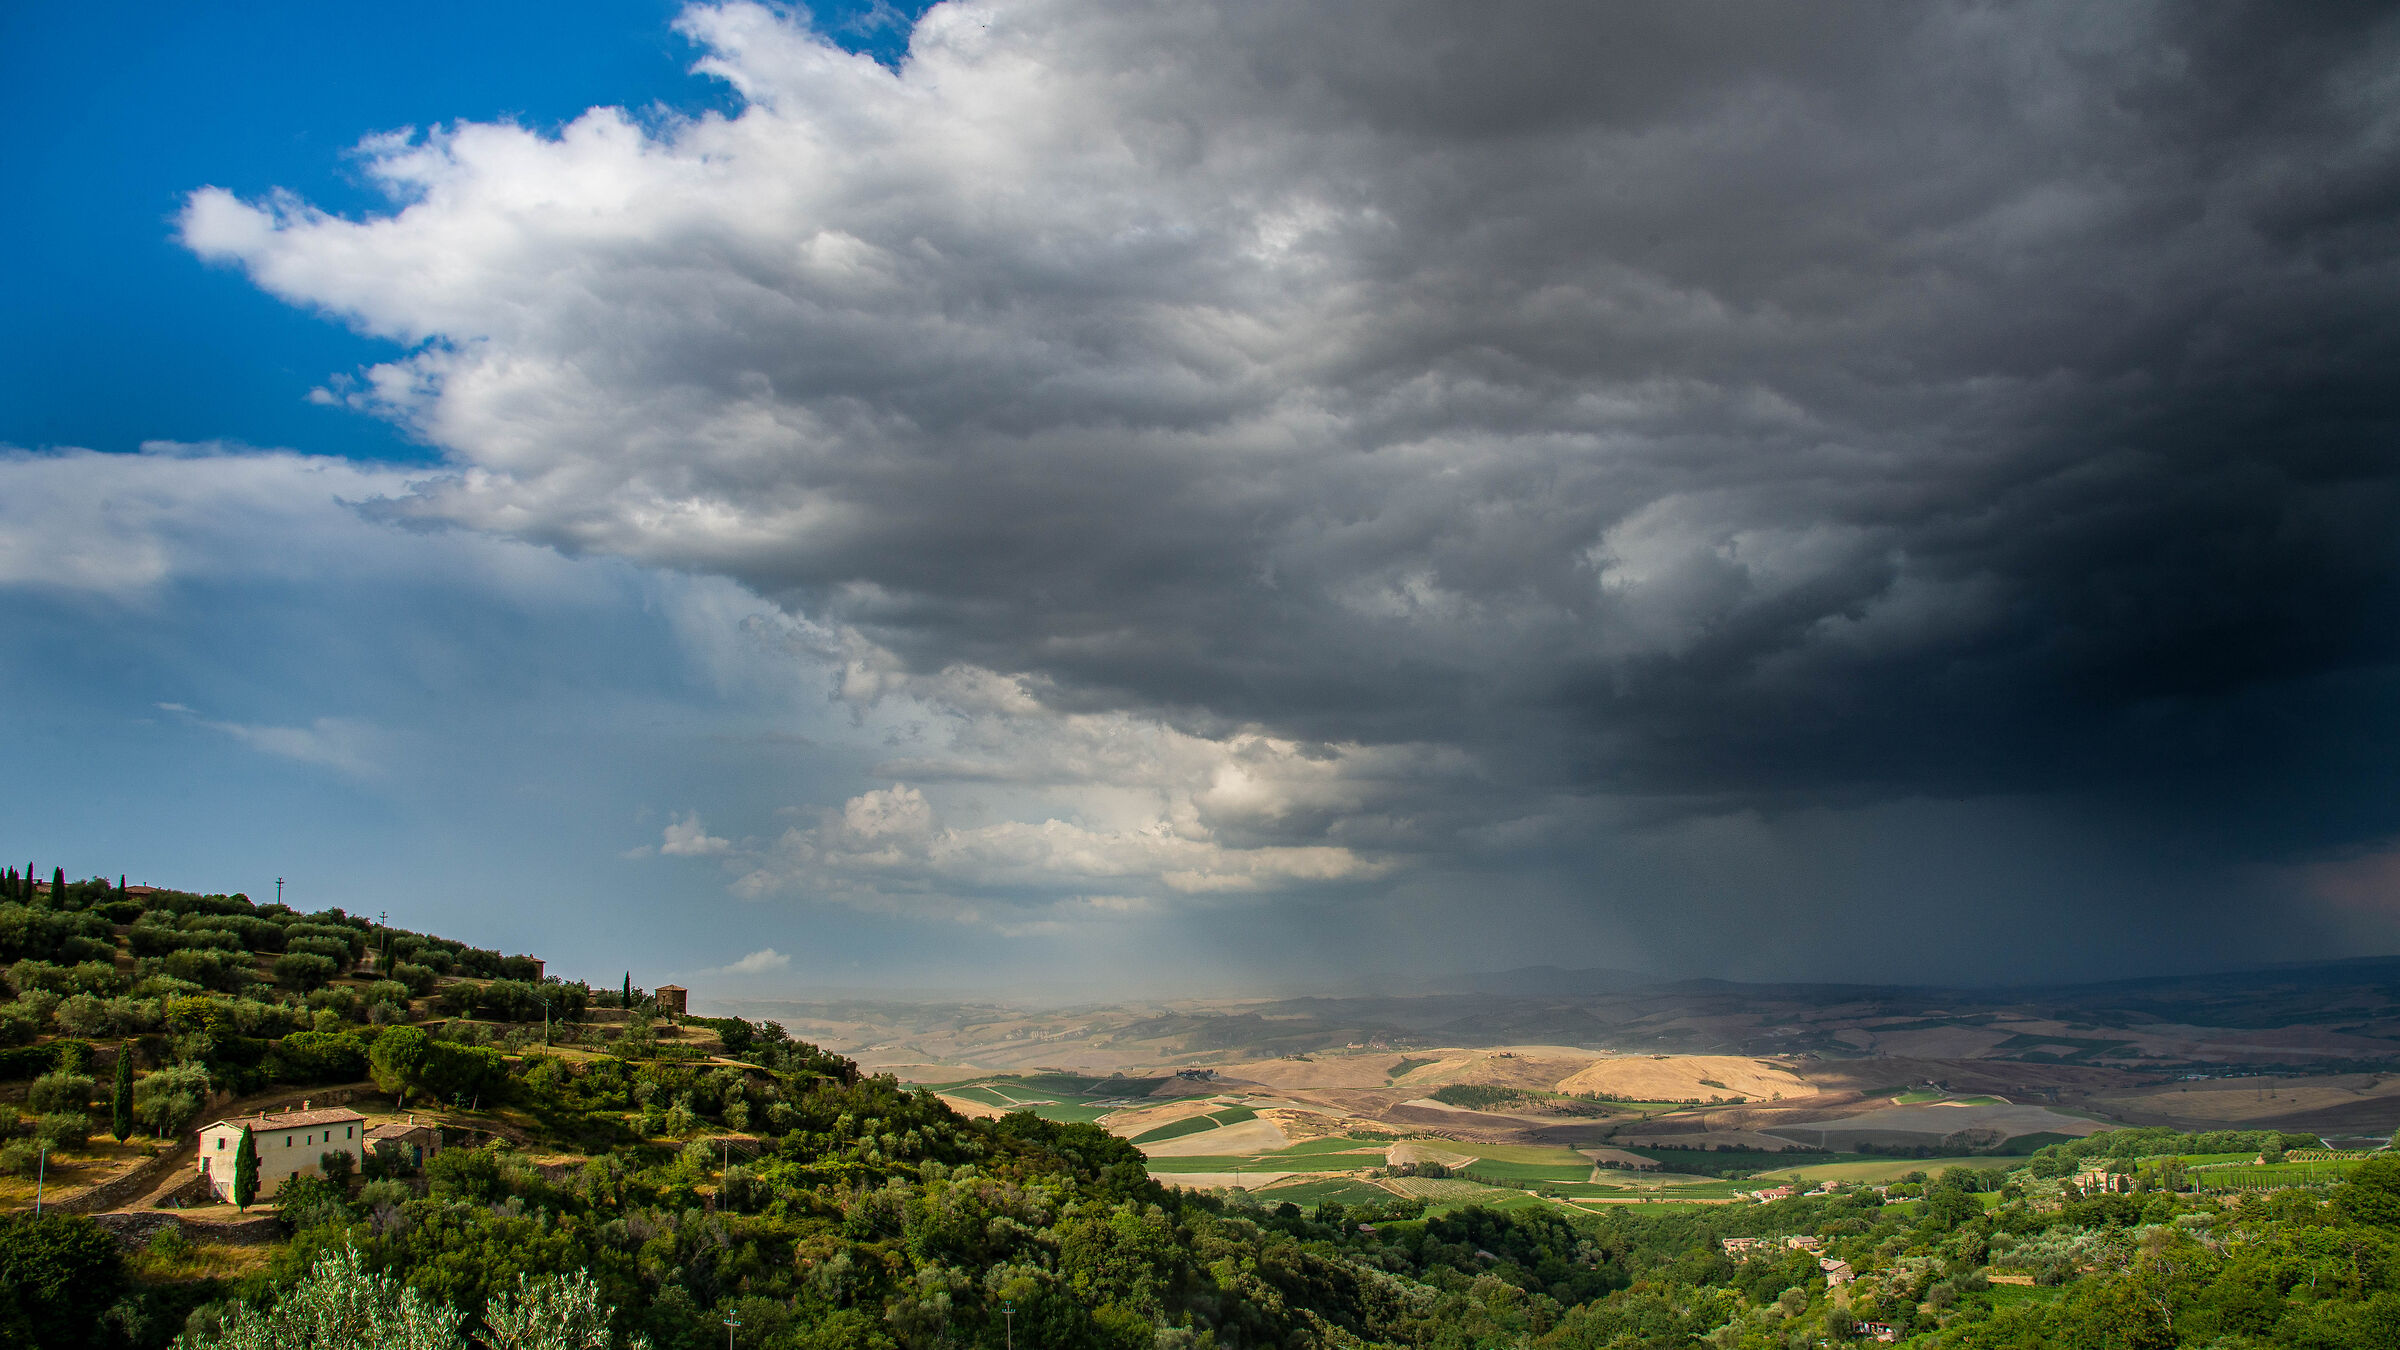 The arrival of the storm in Val d'Orcia...